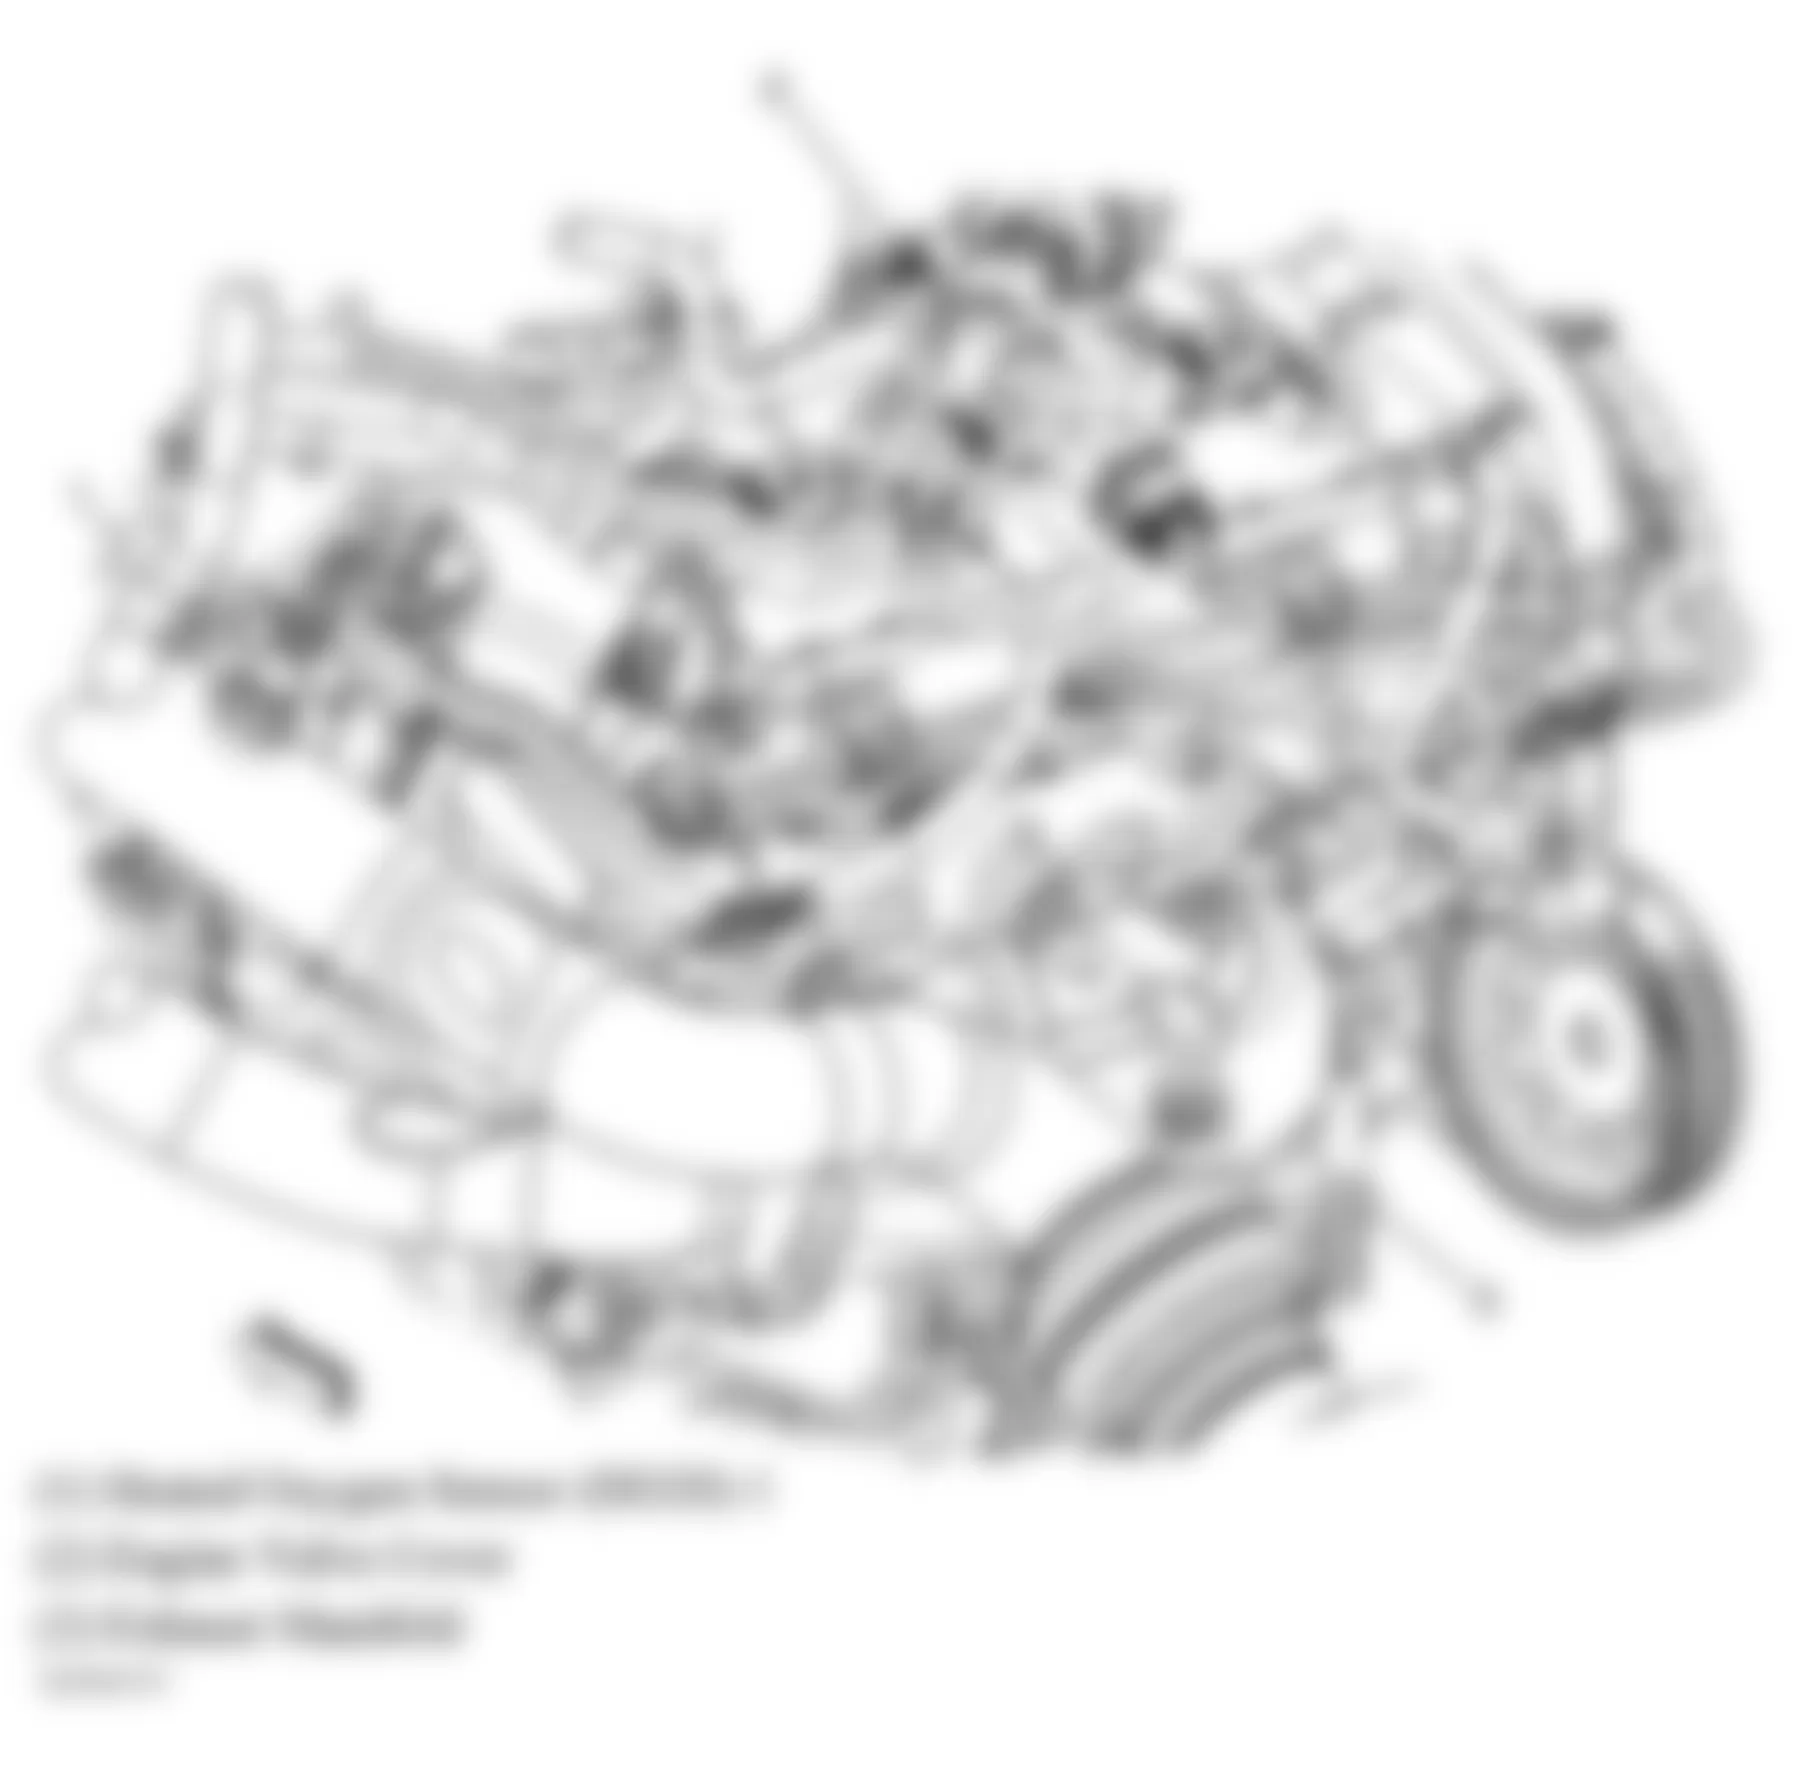 Buick LaCrosse CXL 2005 - Component Locations -  Right Rear Of Engine (3.6L)